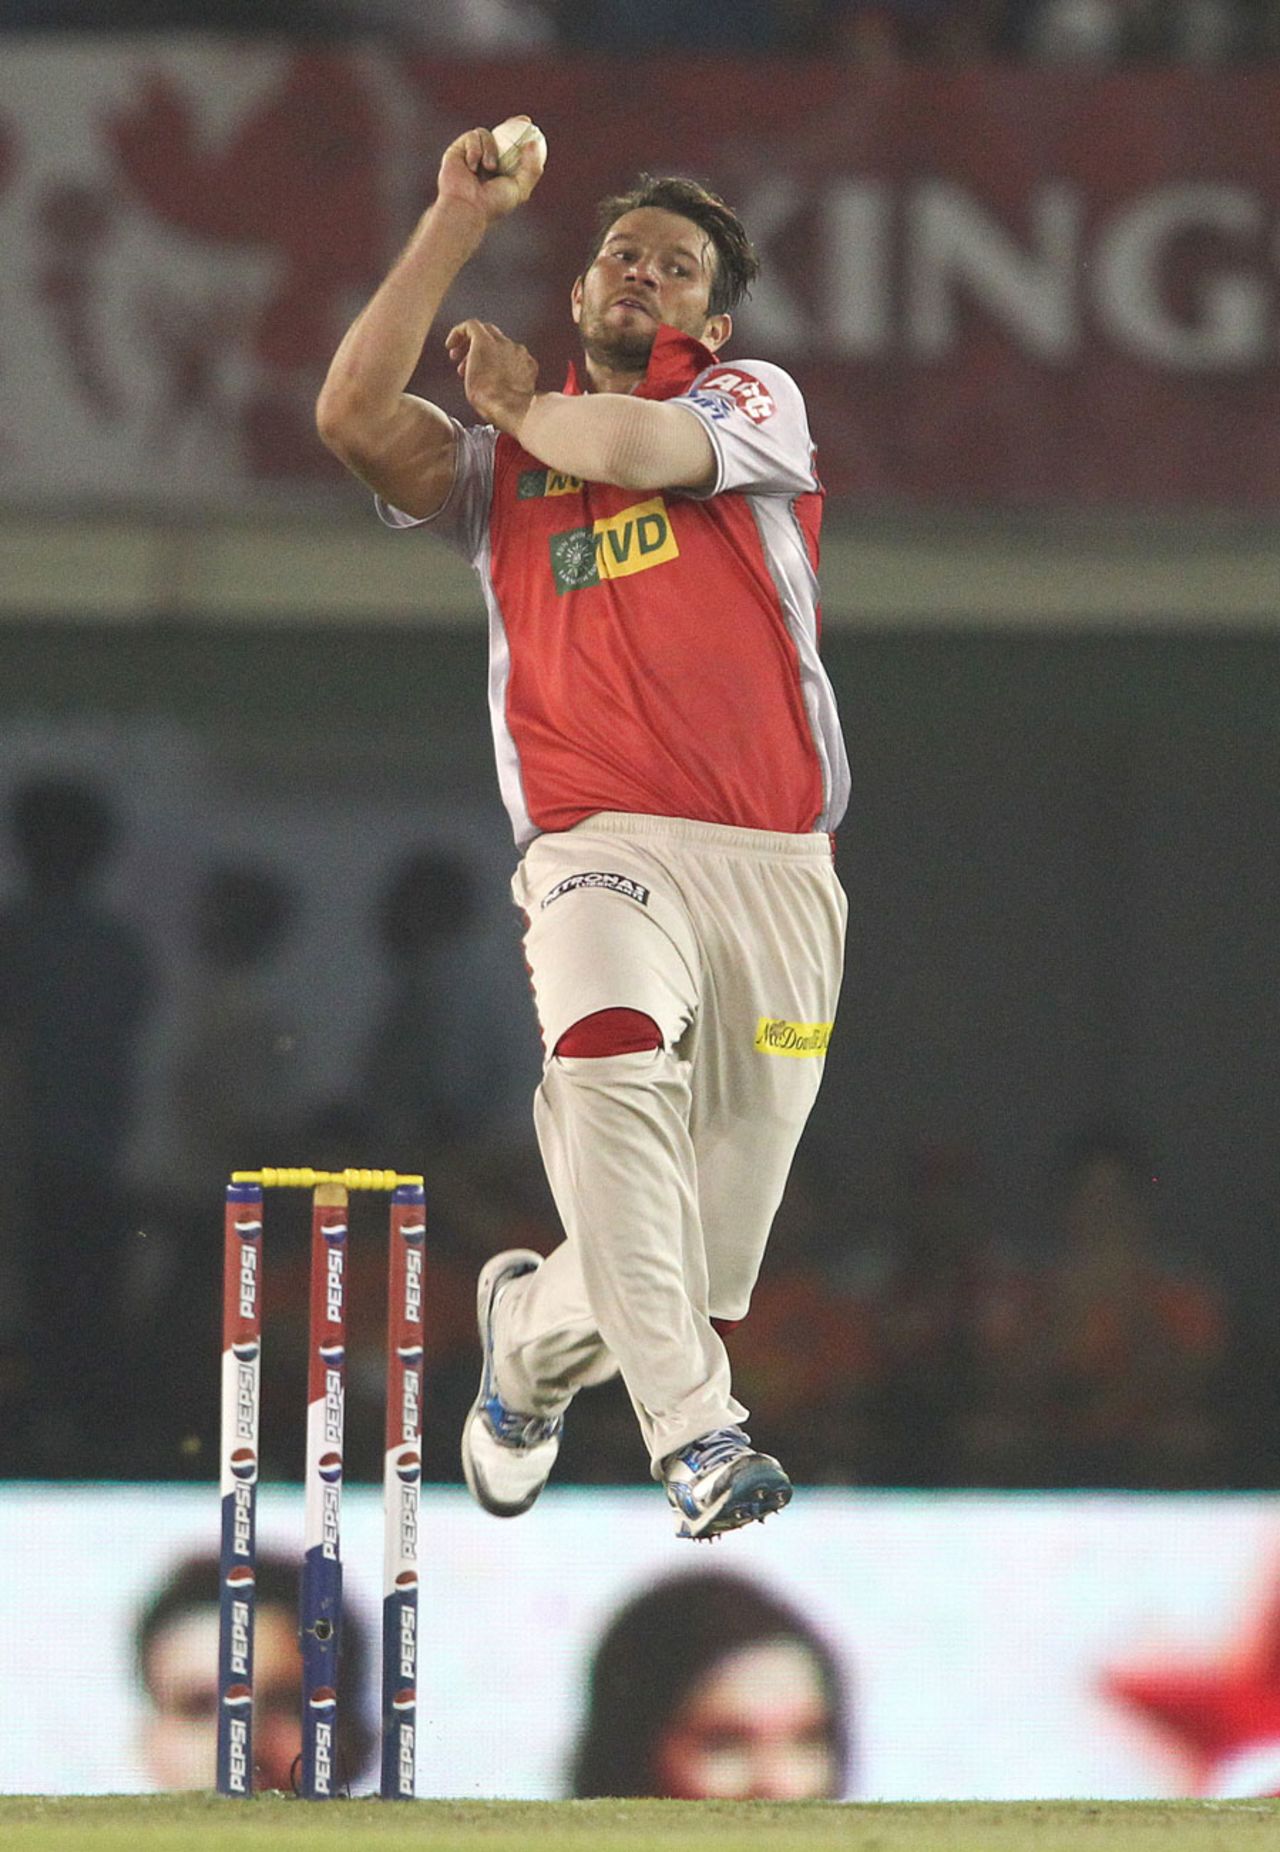 Michael Neser in his delivery stride, Kings XI Punjab v Royal Challengers Bangalore, IPL 2013, Mohali, May 6, 2013